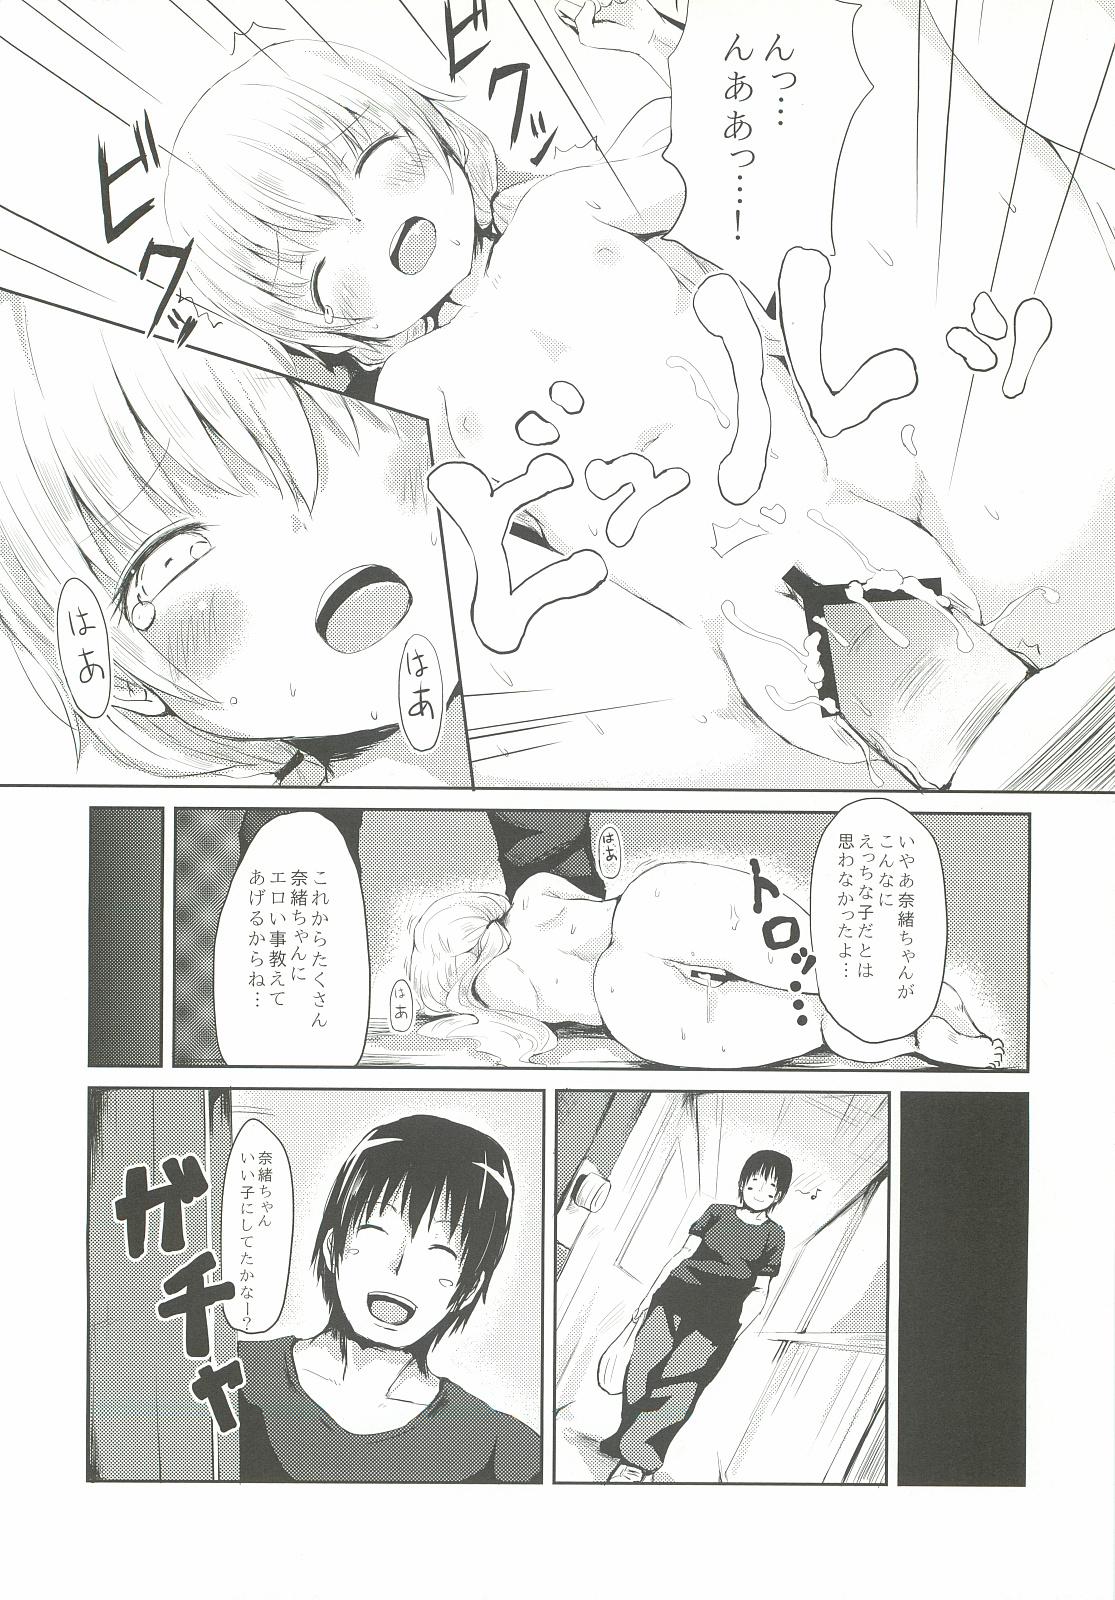 Jerkoff Nao-chan Choukyou Enikki Cocksucker - Page 11